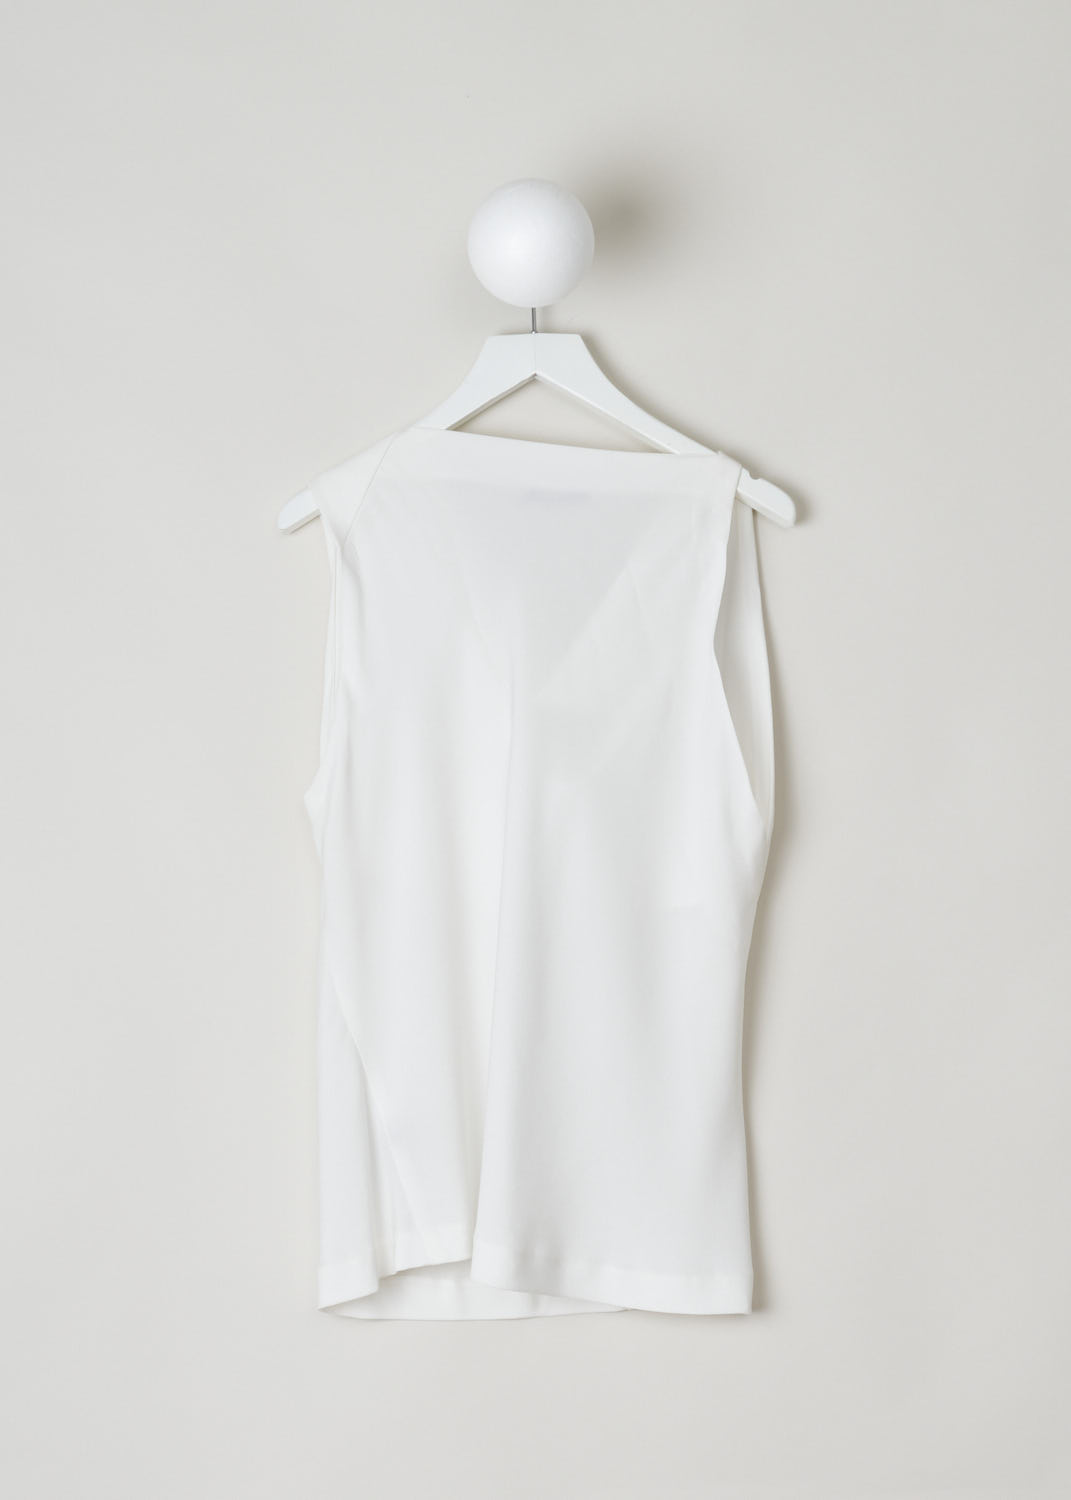 DONNA KARAN, SLEEVELESS COWL NECK TOP, A42T259MB0_132, White, Back, This white sleeveless top has a cowl neckline. This lightweight garment has a slightly askew seam on one side.
